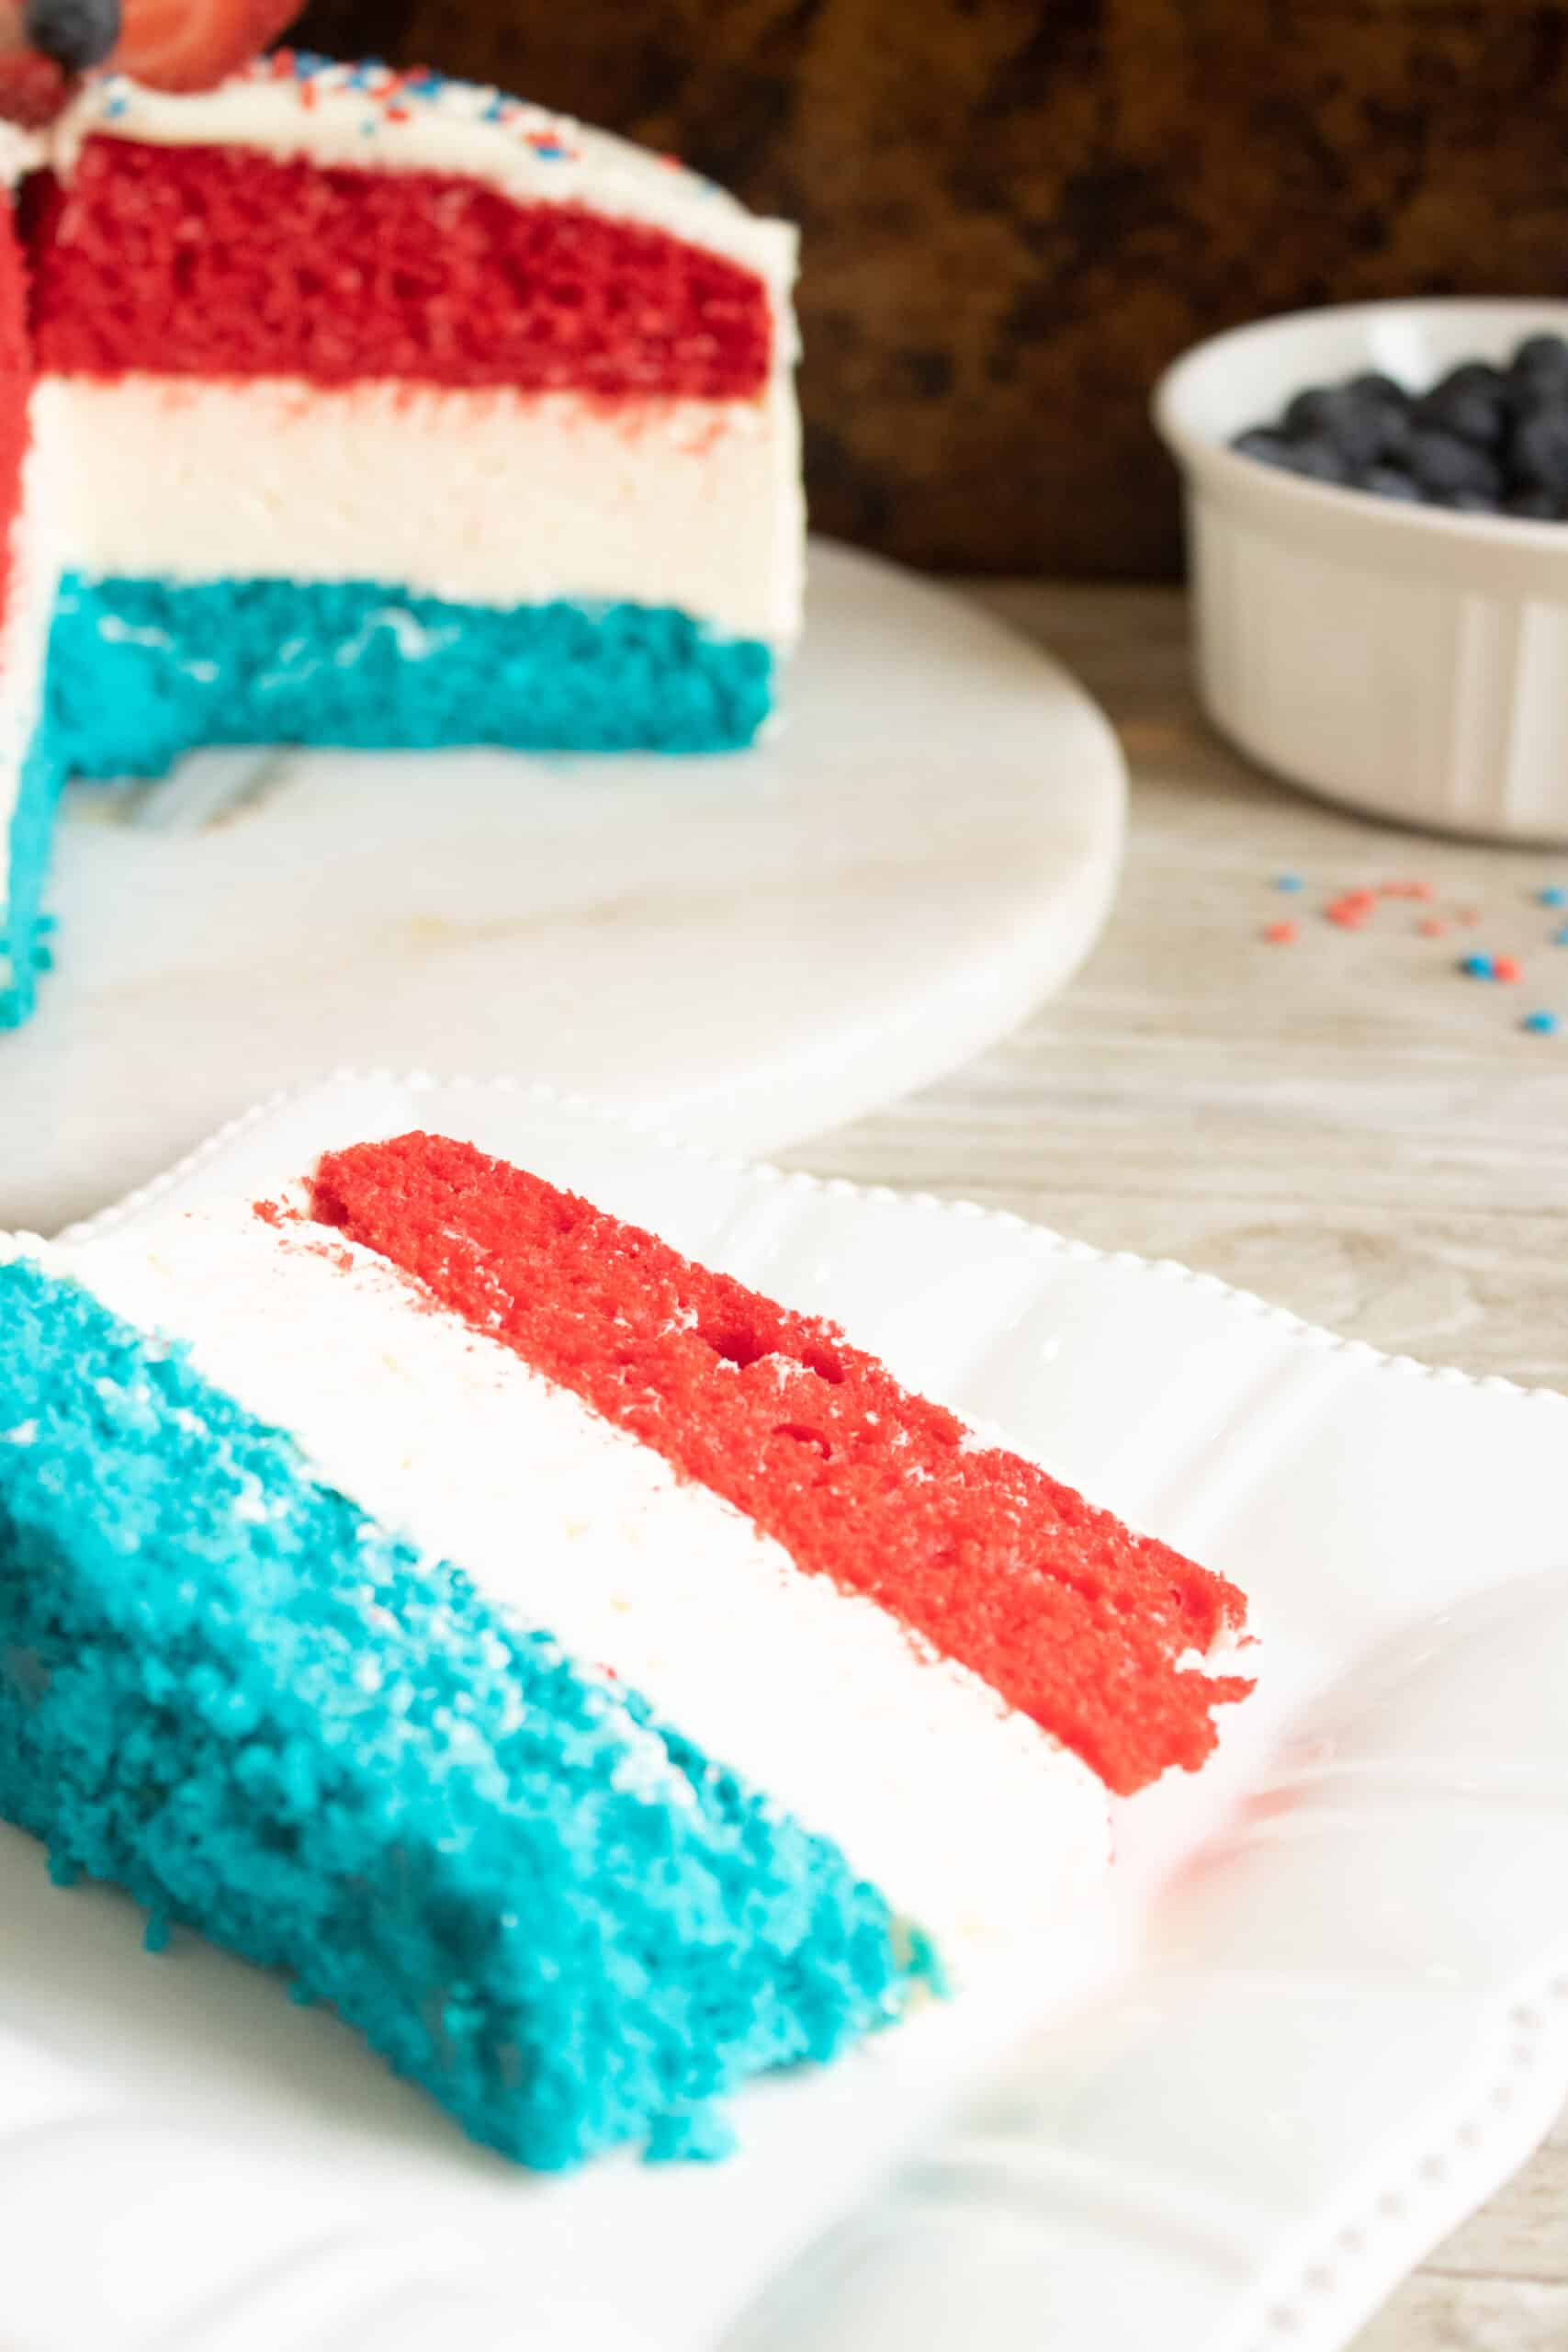 Red, White & Blue Cake with No-Bake Cheesecake Layer
